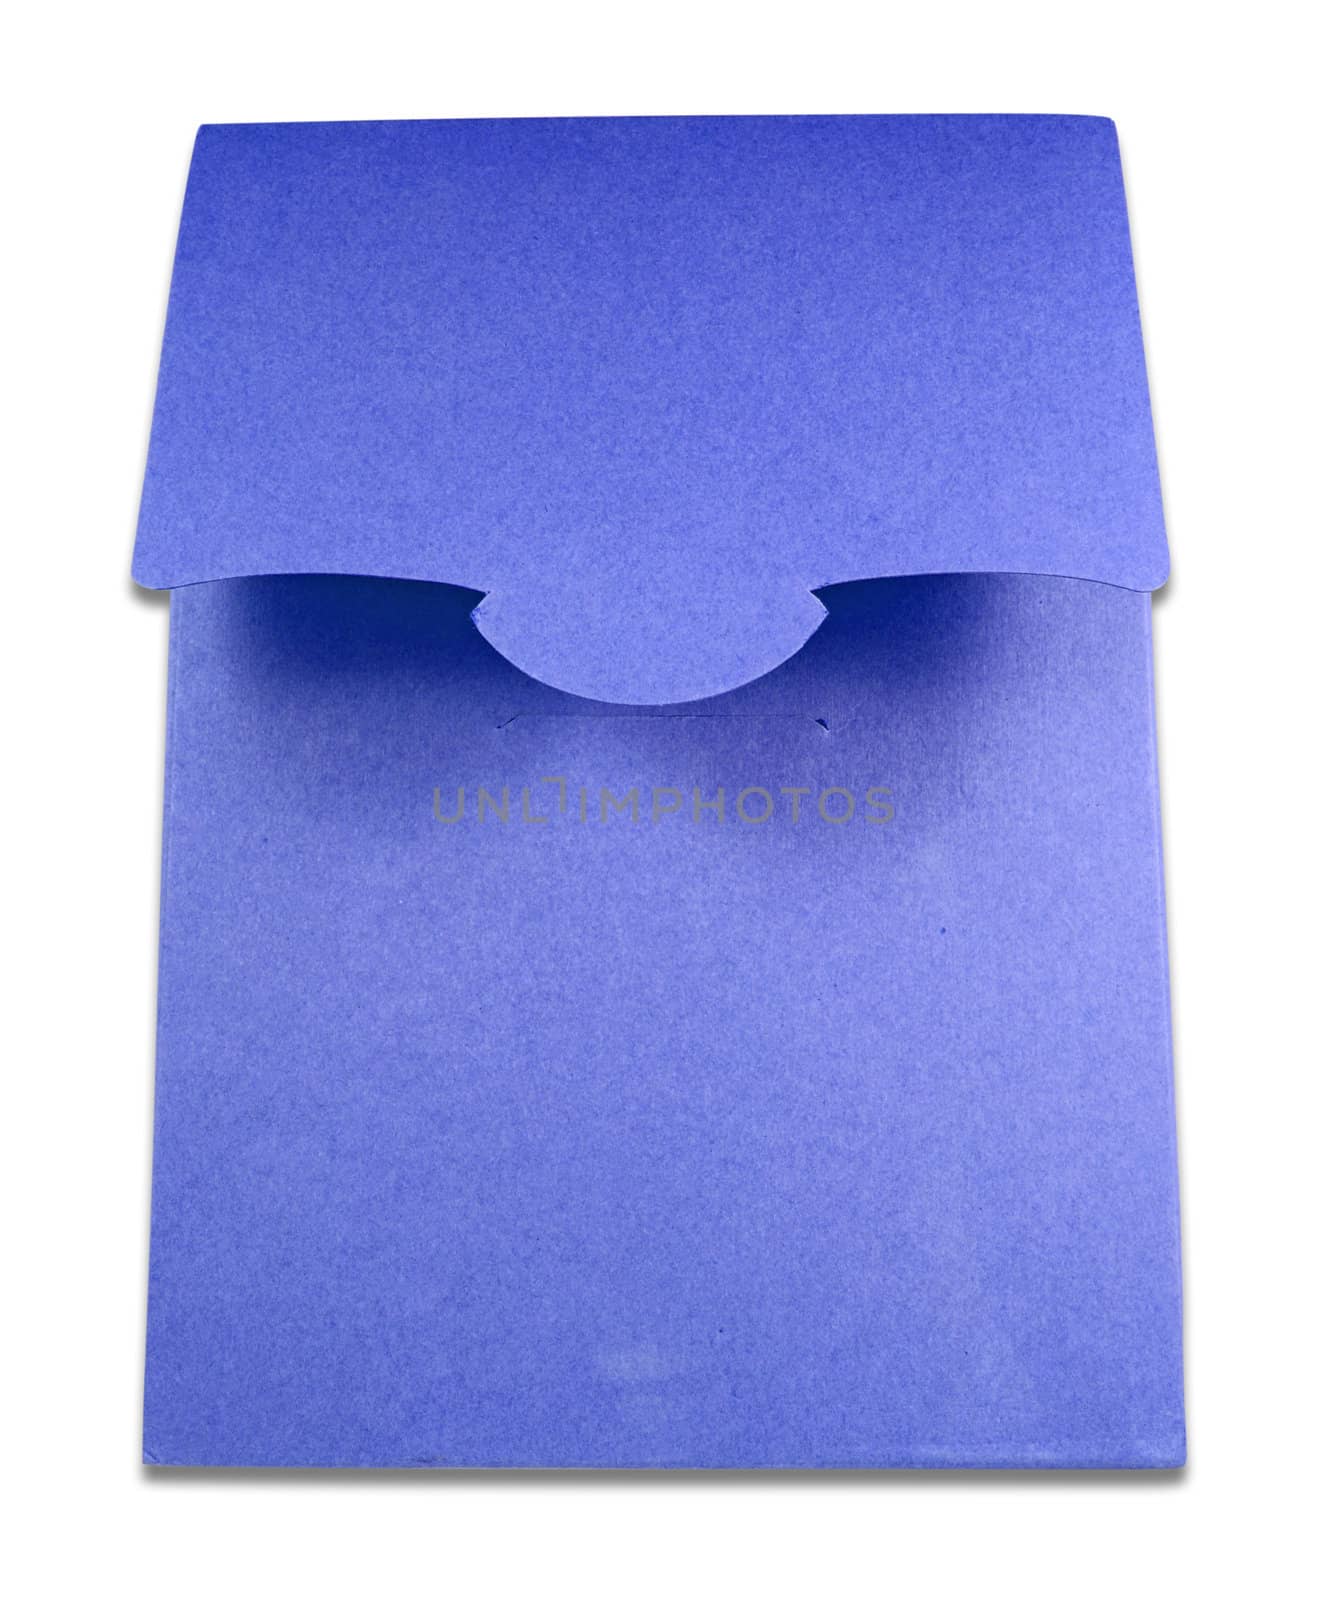 Blank package of blue box isolated on white background by nuchylee